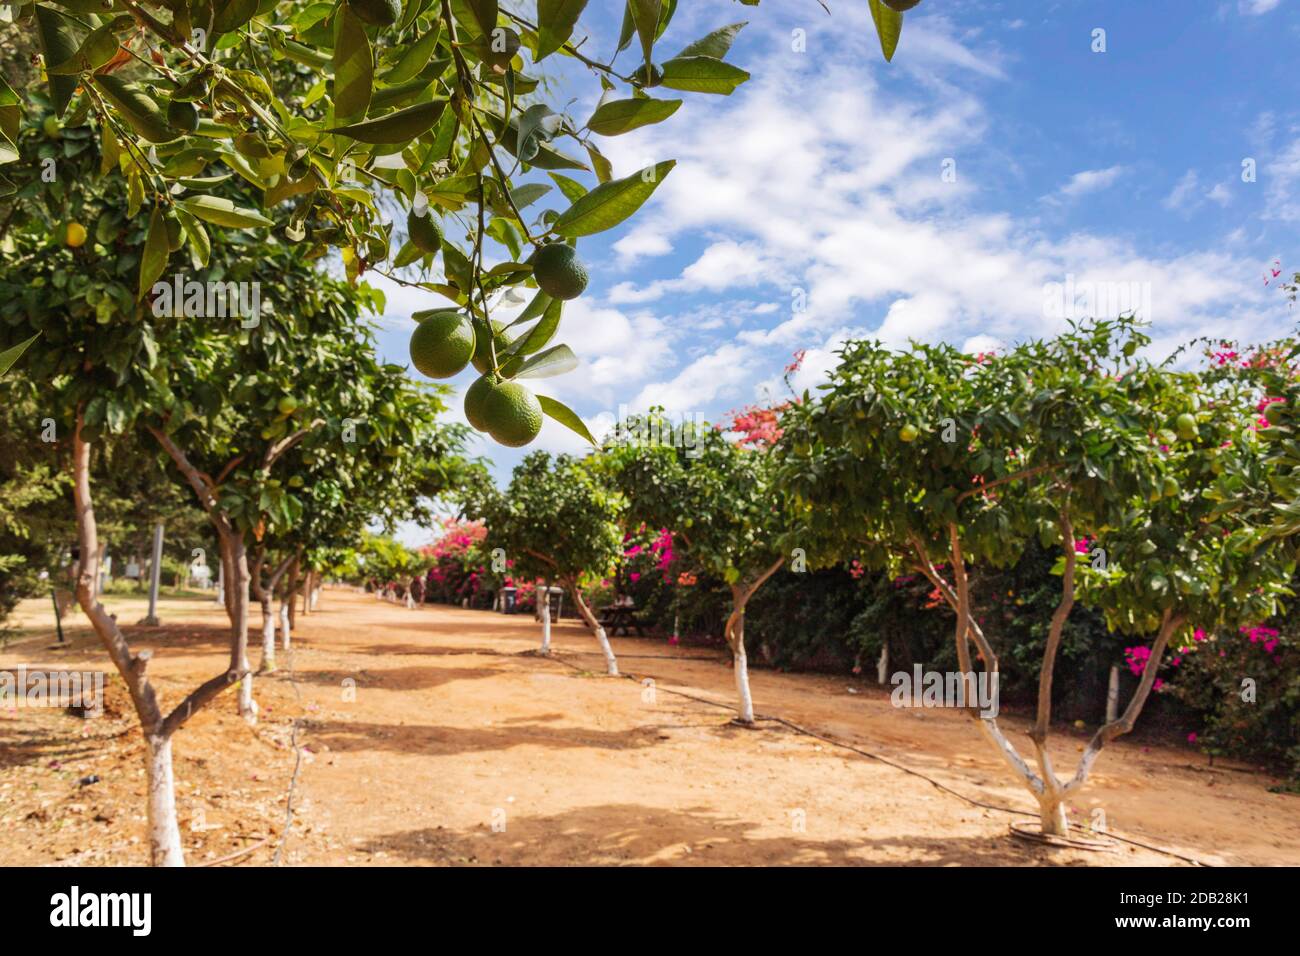 Rows of orange trees in a city orchard against a blue sky with clouds. Israel Stock Photo